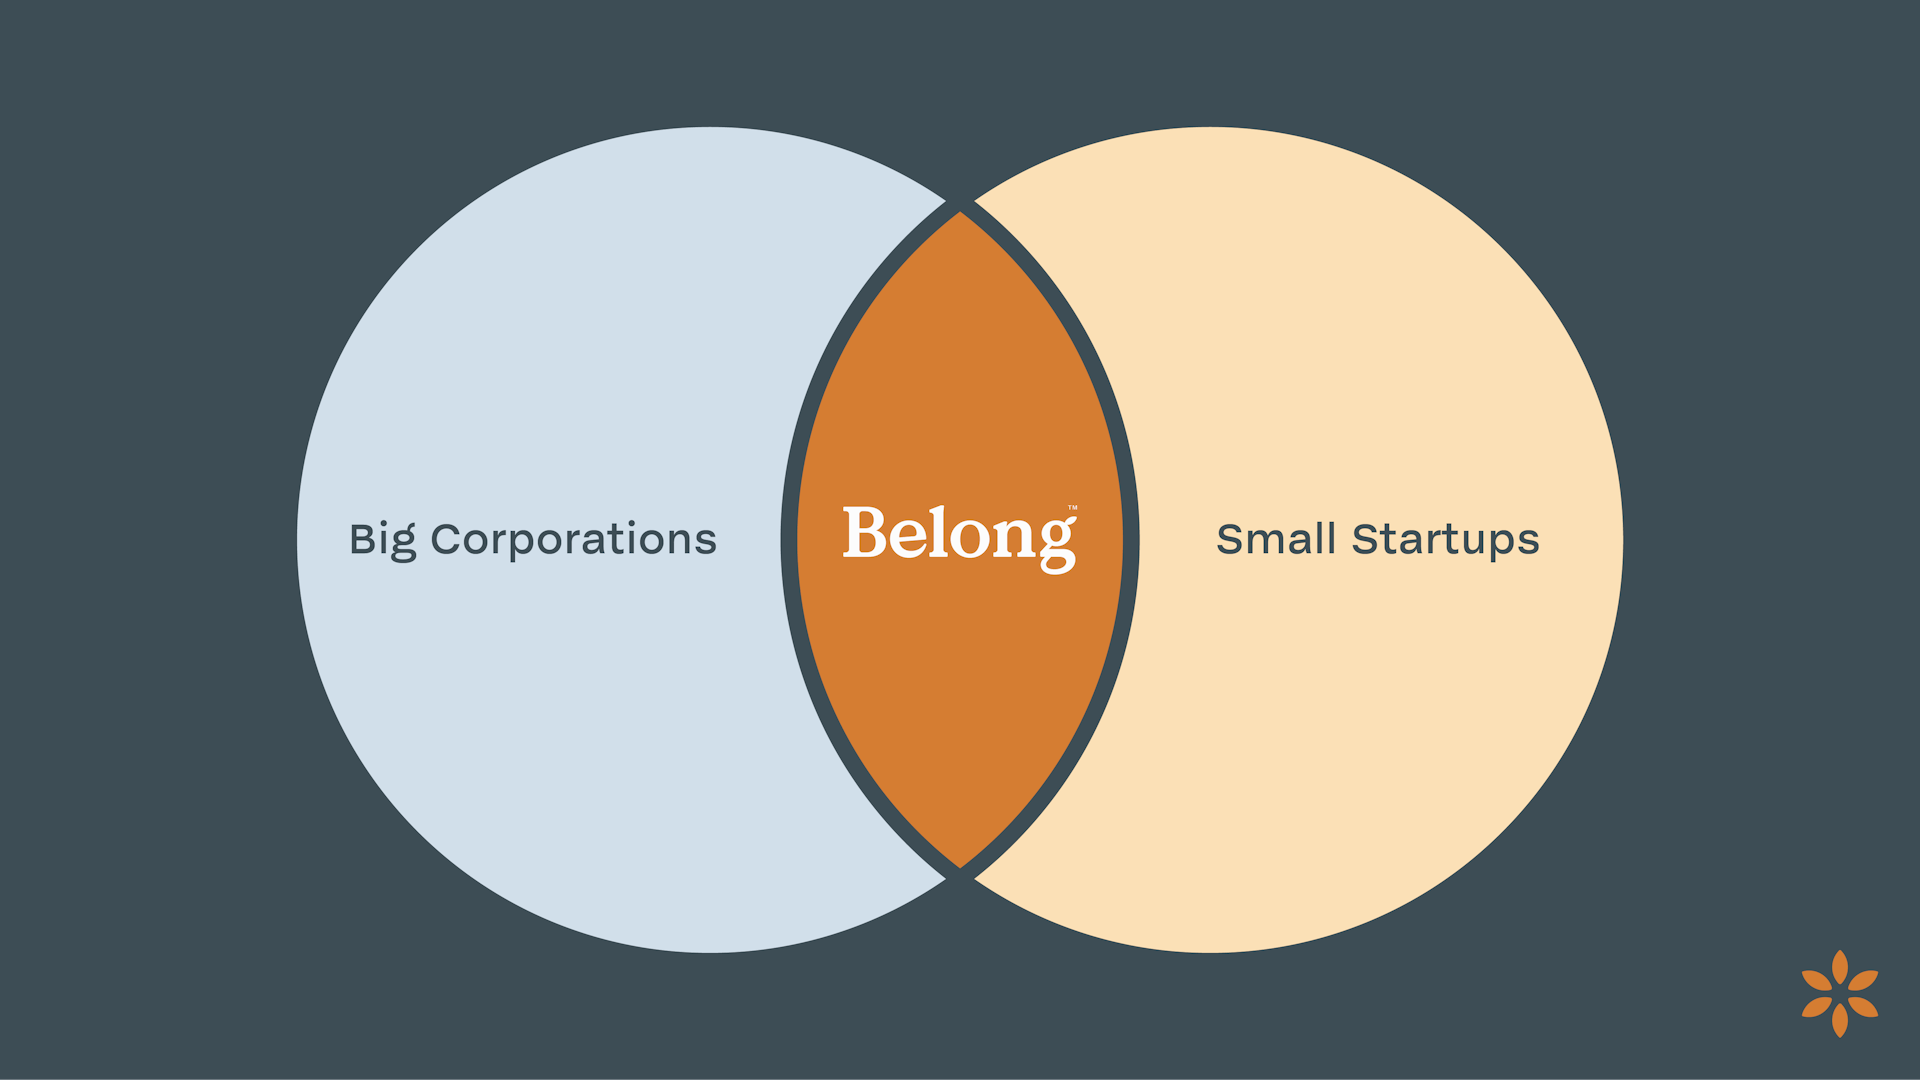 Venn diagram of Belong in the overlap of 'Big Corporations' and 'Small Startups'